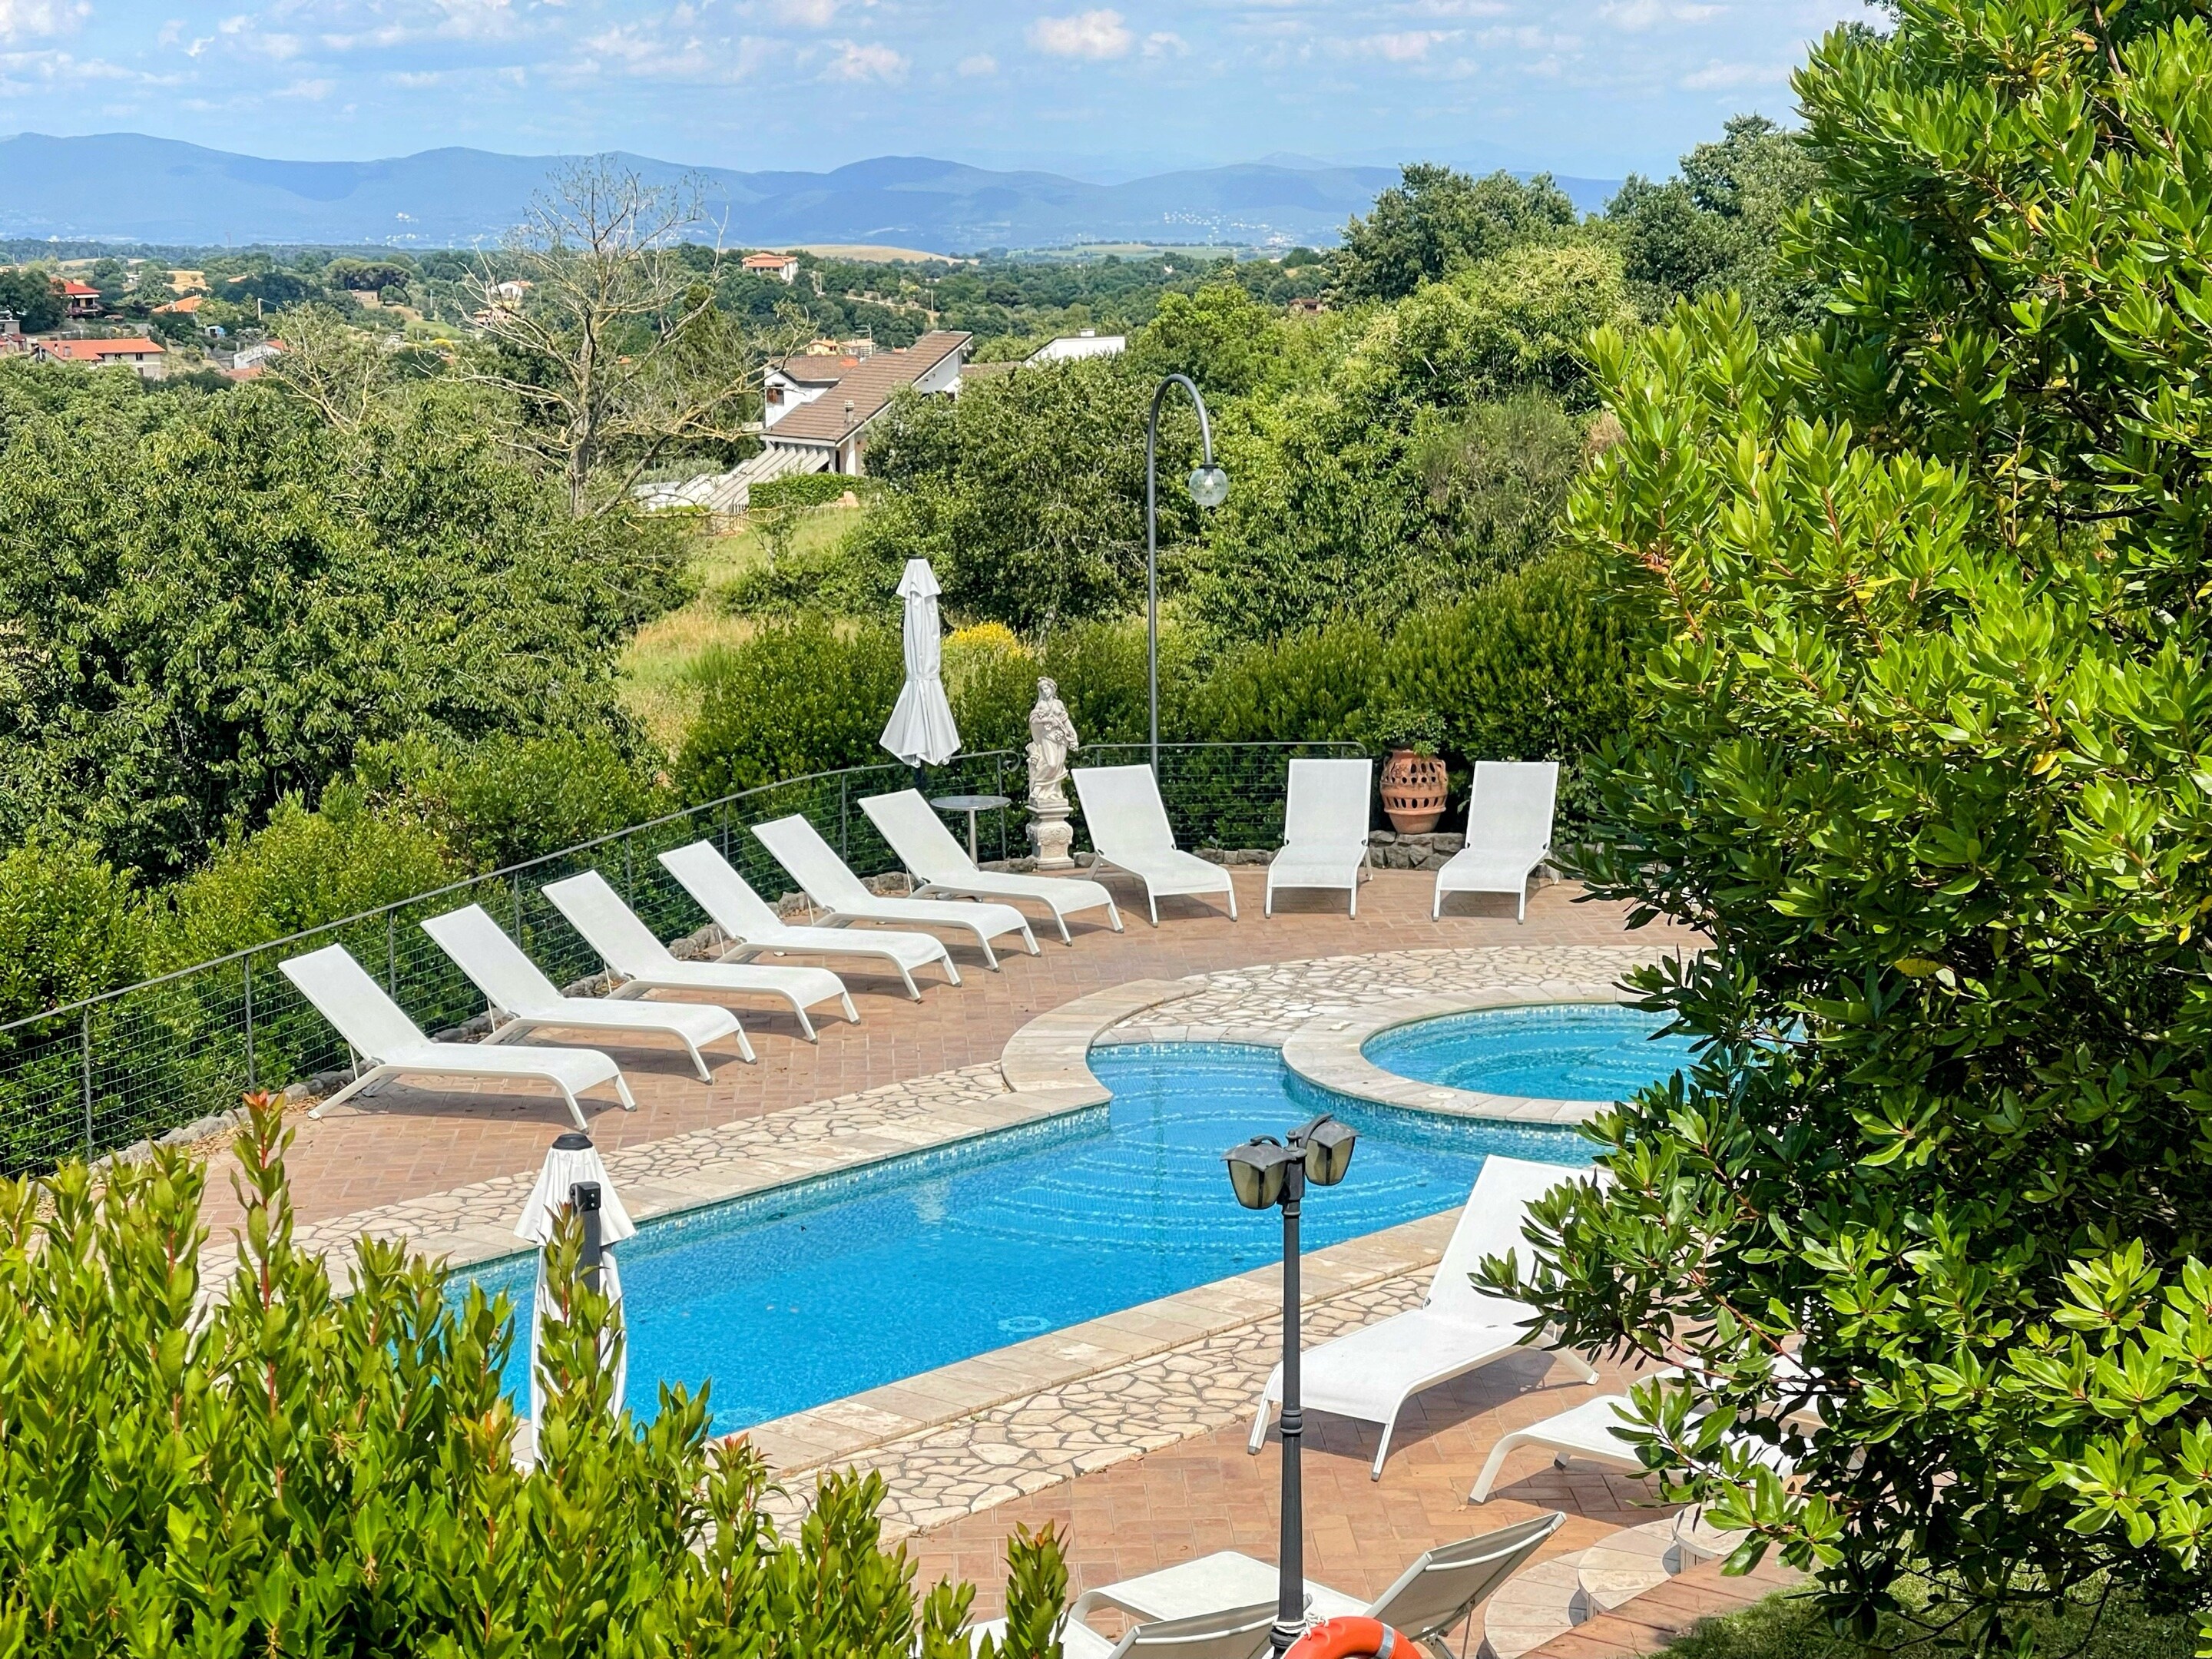 Property Image 1 - pool and jacuzzi - Charming villa in Umbria - sleeps 24 - lake view